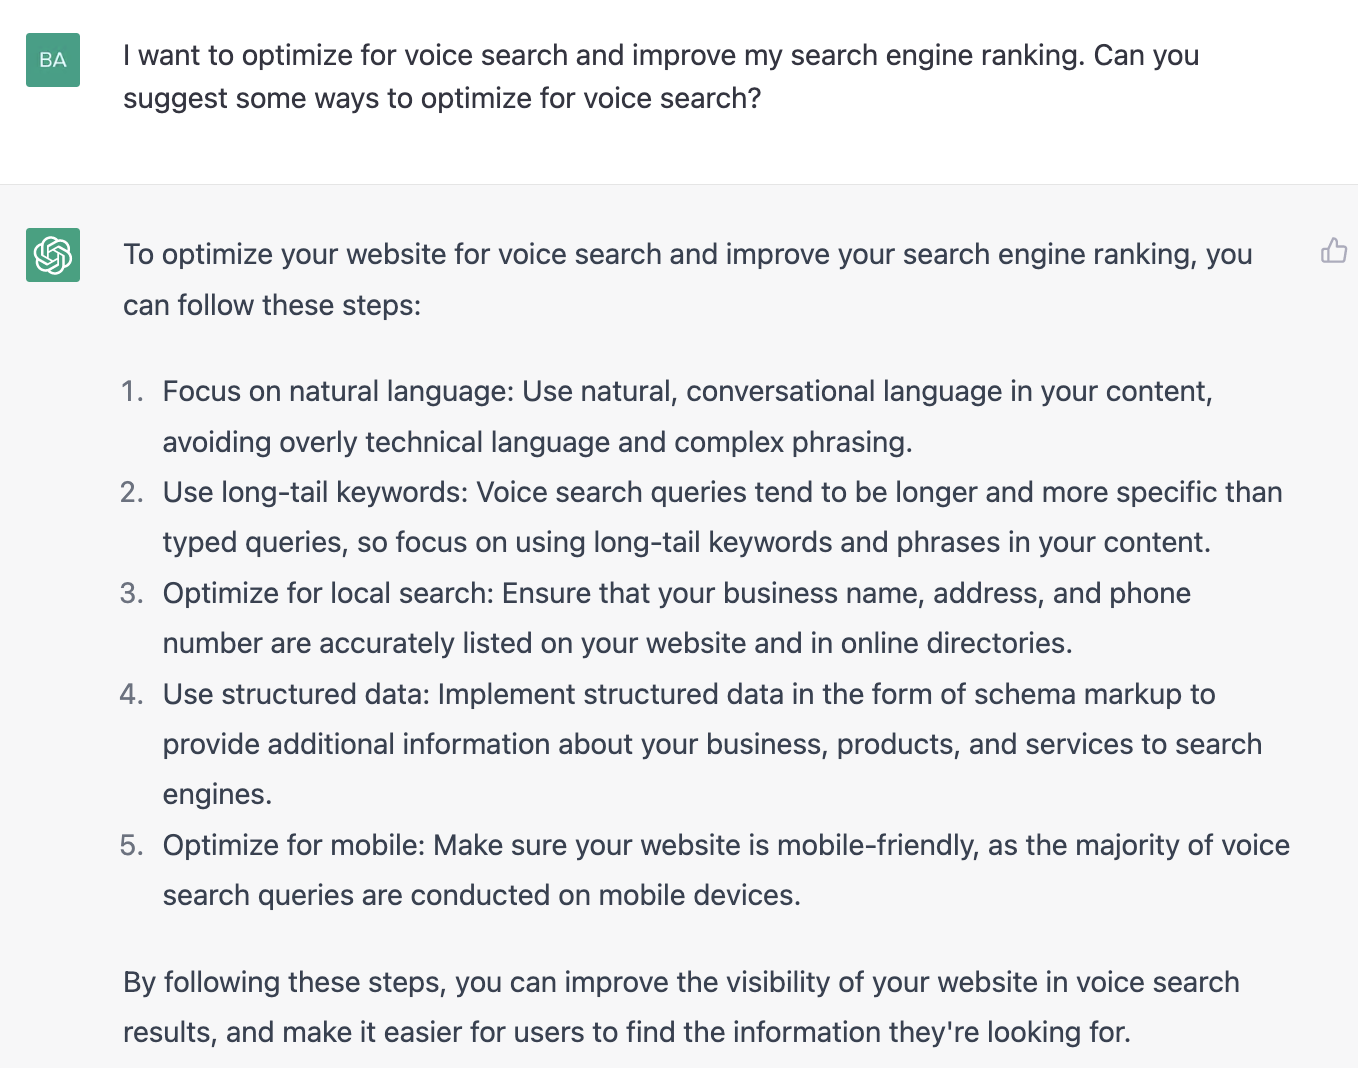 ChatGPT prompt about how to optimize for voice search and improve search engine ranking